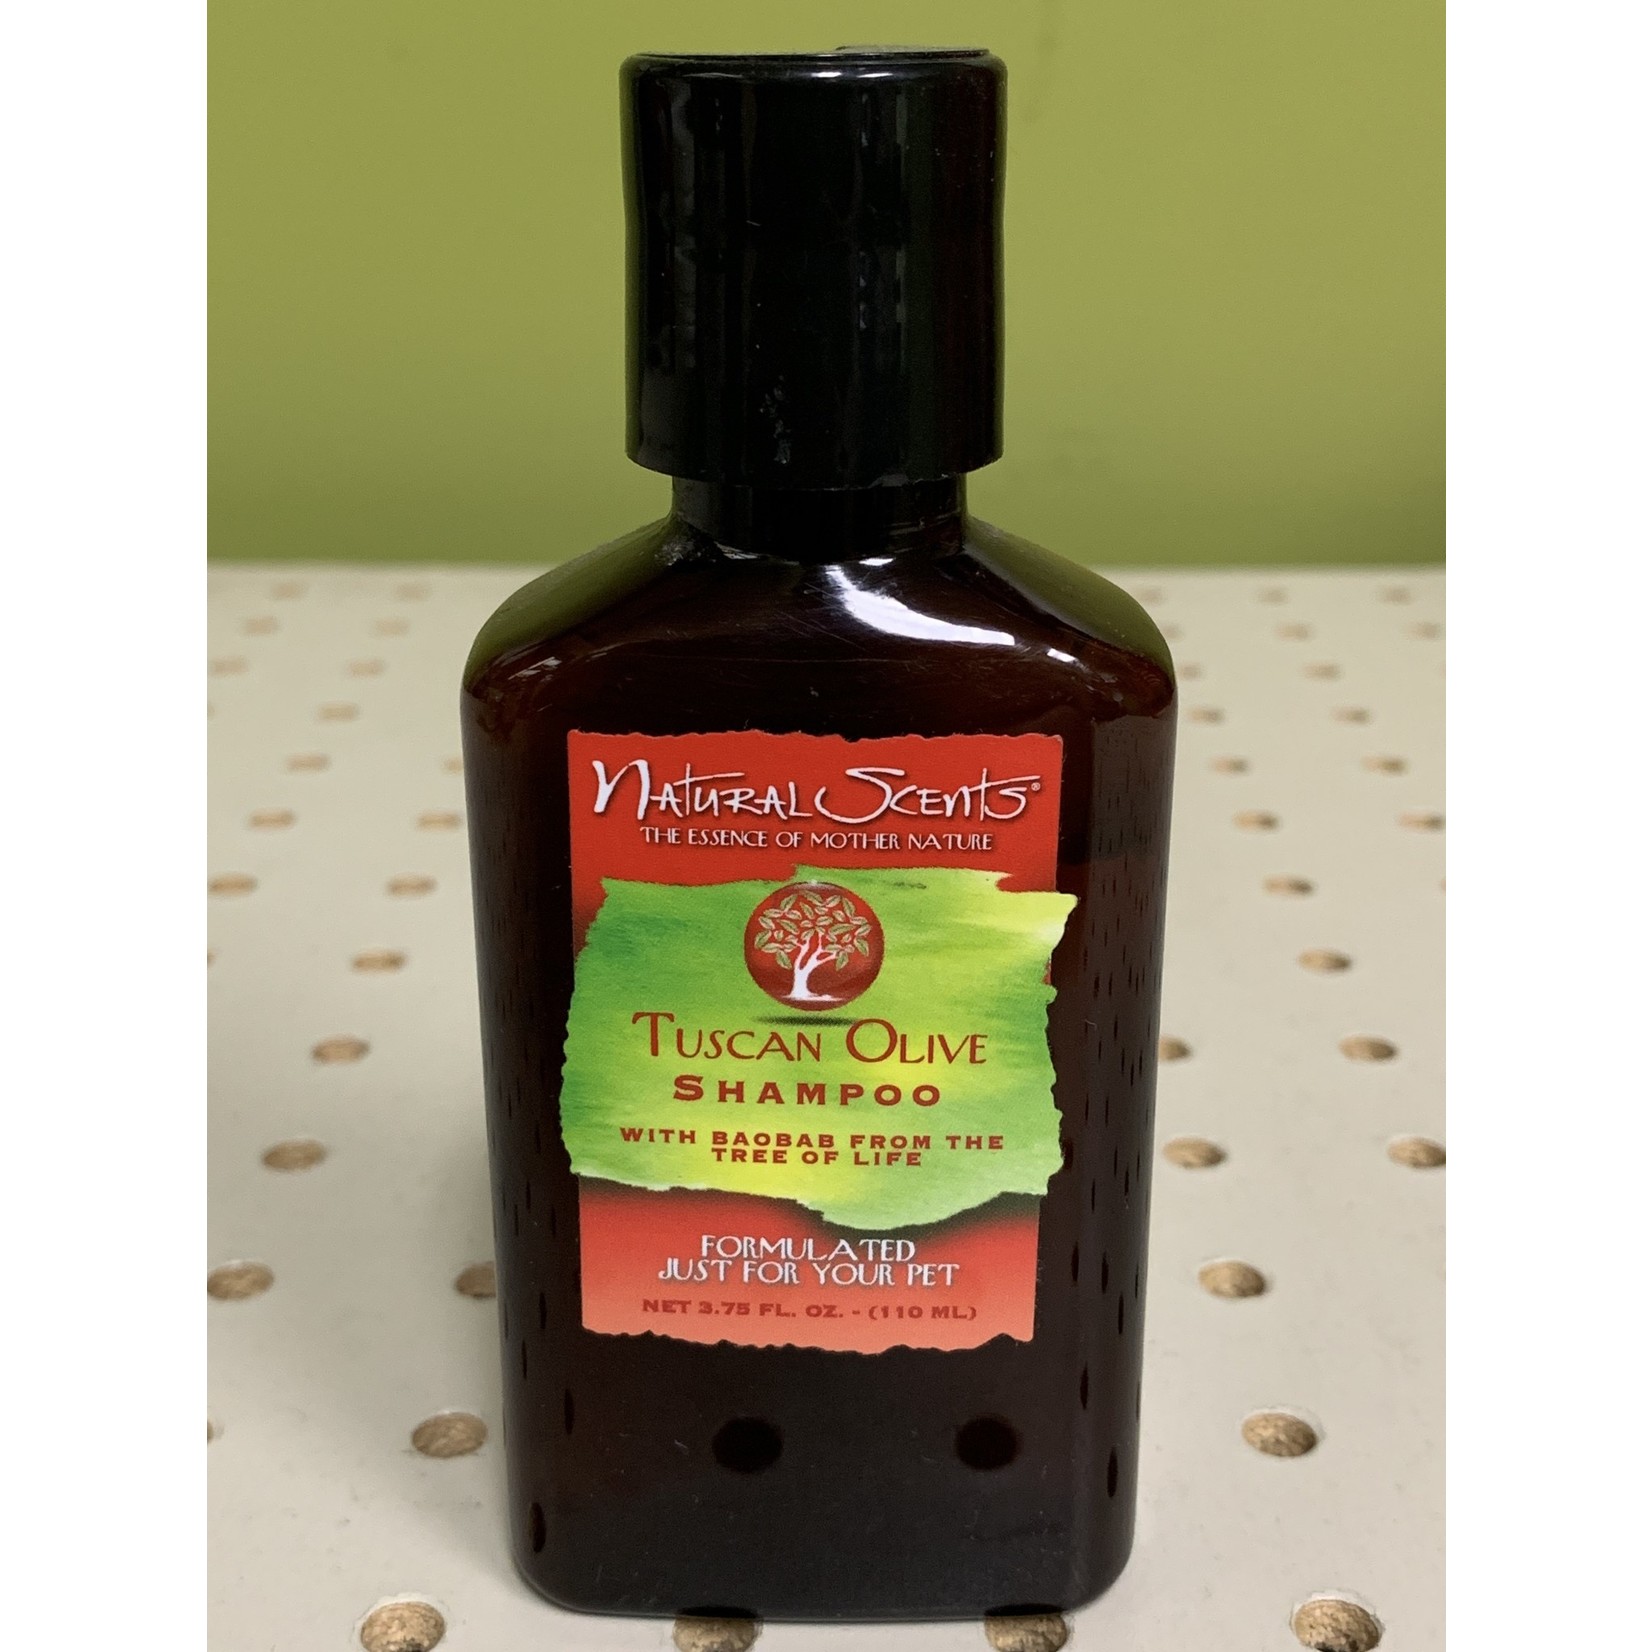 NATURAL SCENTS NATURAL SCENTS: Tuscan Olive Shampoo 3.75OZ with Baobab from the tree of life